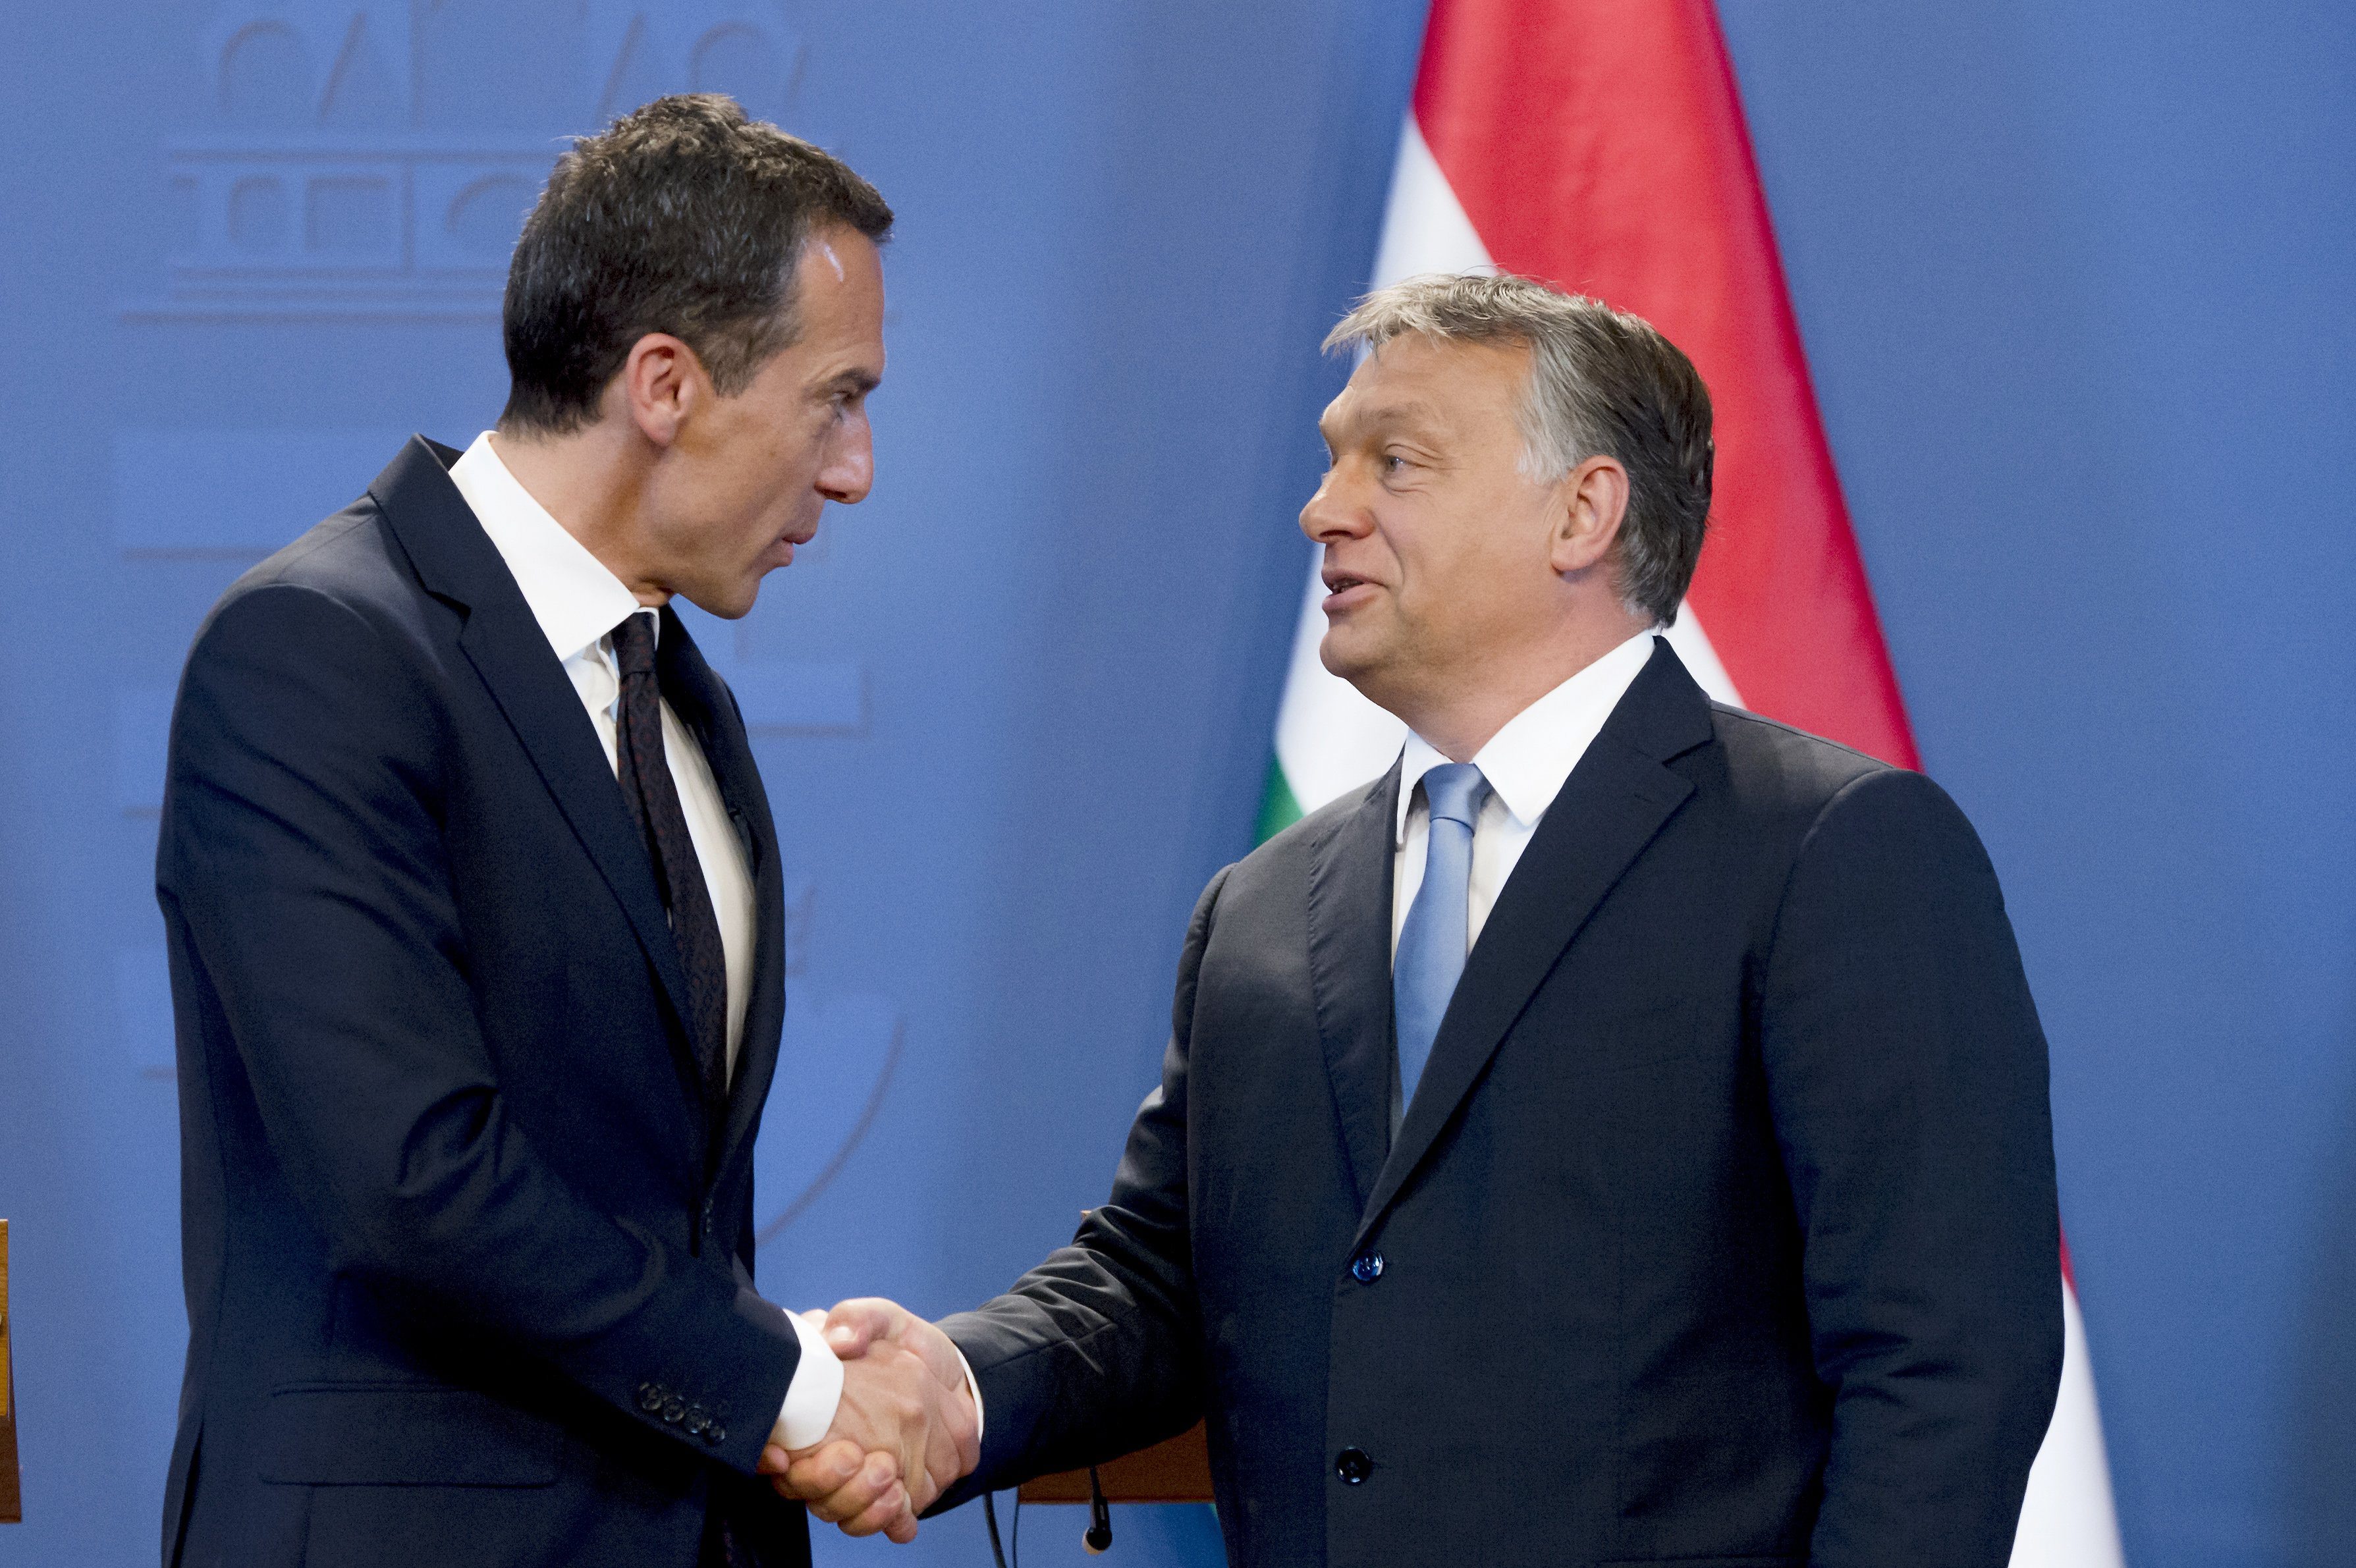 Austrian Federal Chancellor Christian Kern (L) and Hungarian Prime Minister Viktor Orban (R) shake hands after their joint press conference at the Delegation Room of the Parliament in Budapest, Hungary on July 26 2016 (Szilard Koszticsak—EPA)